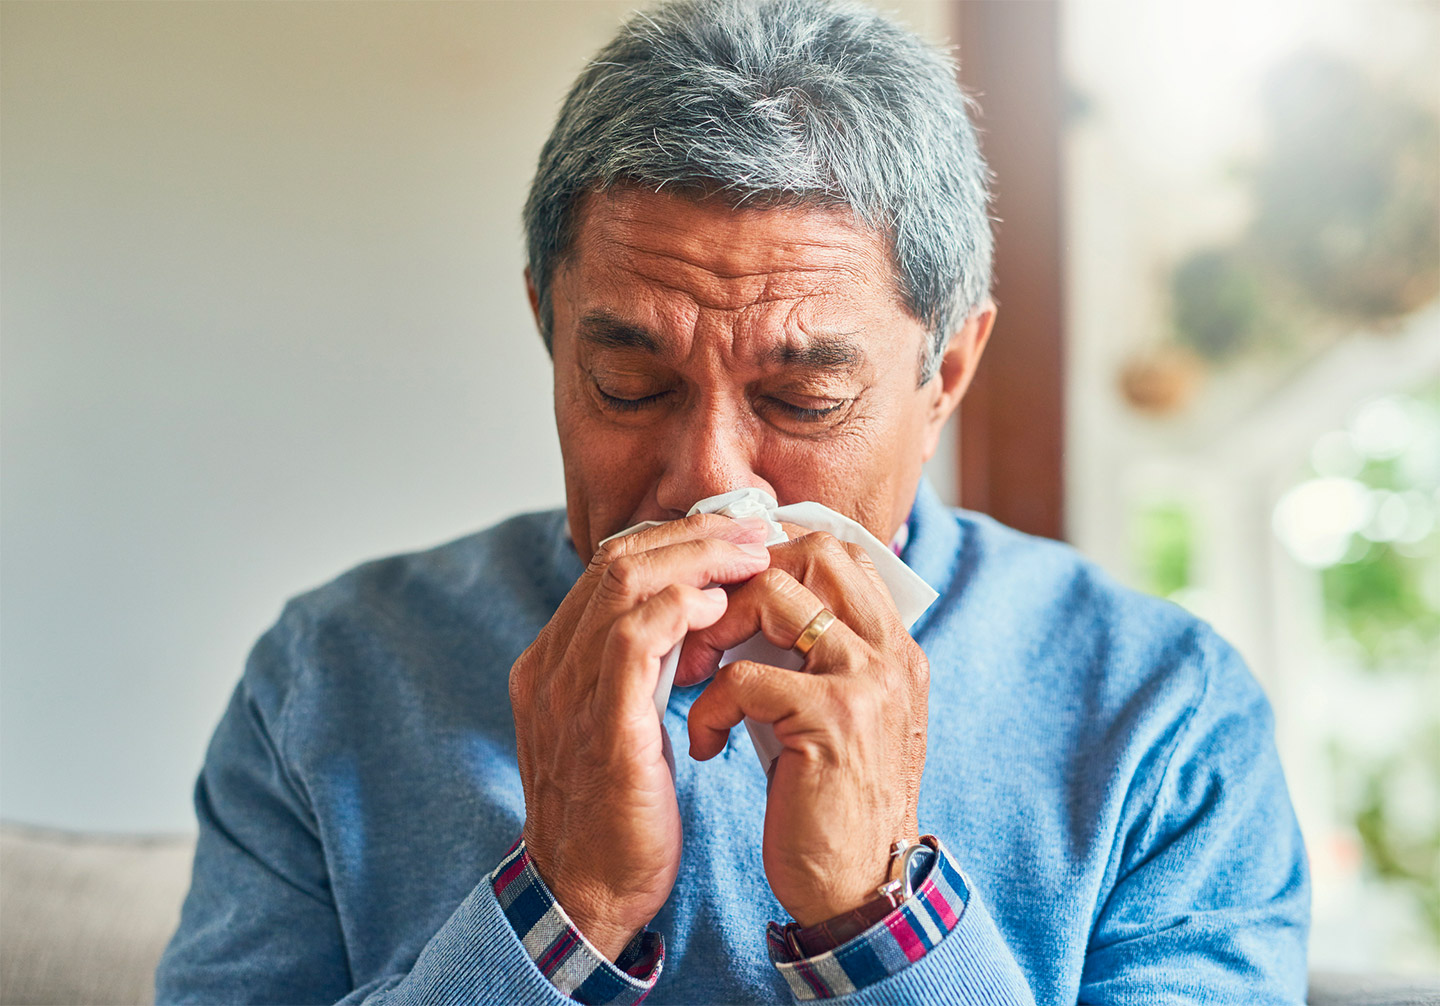 Older man with stuffy nose